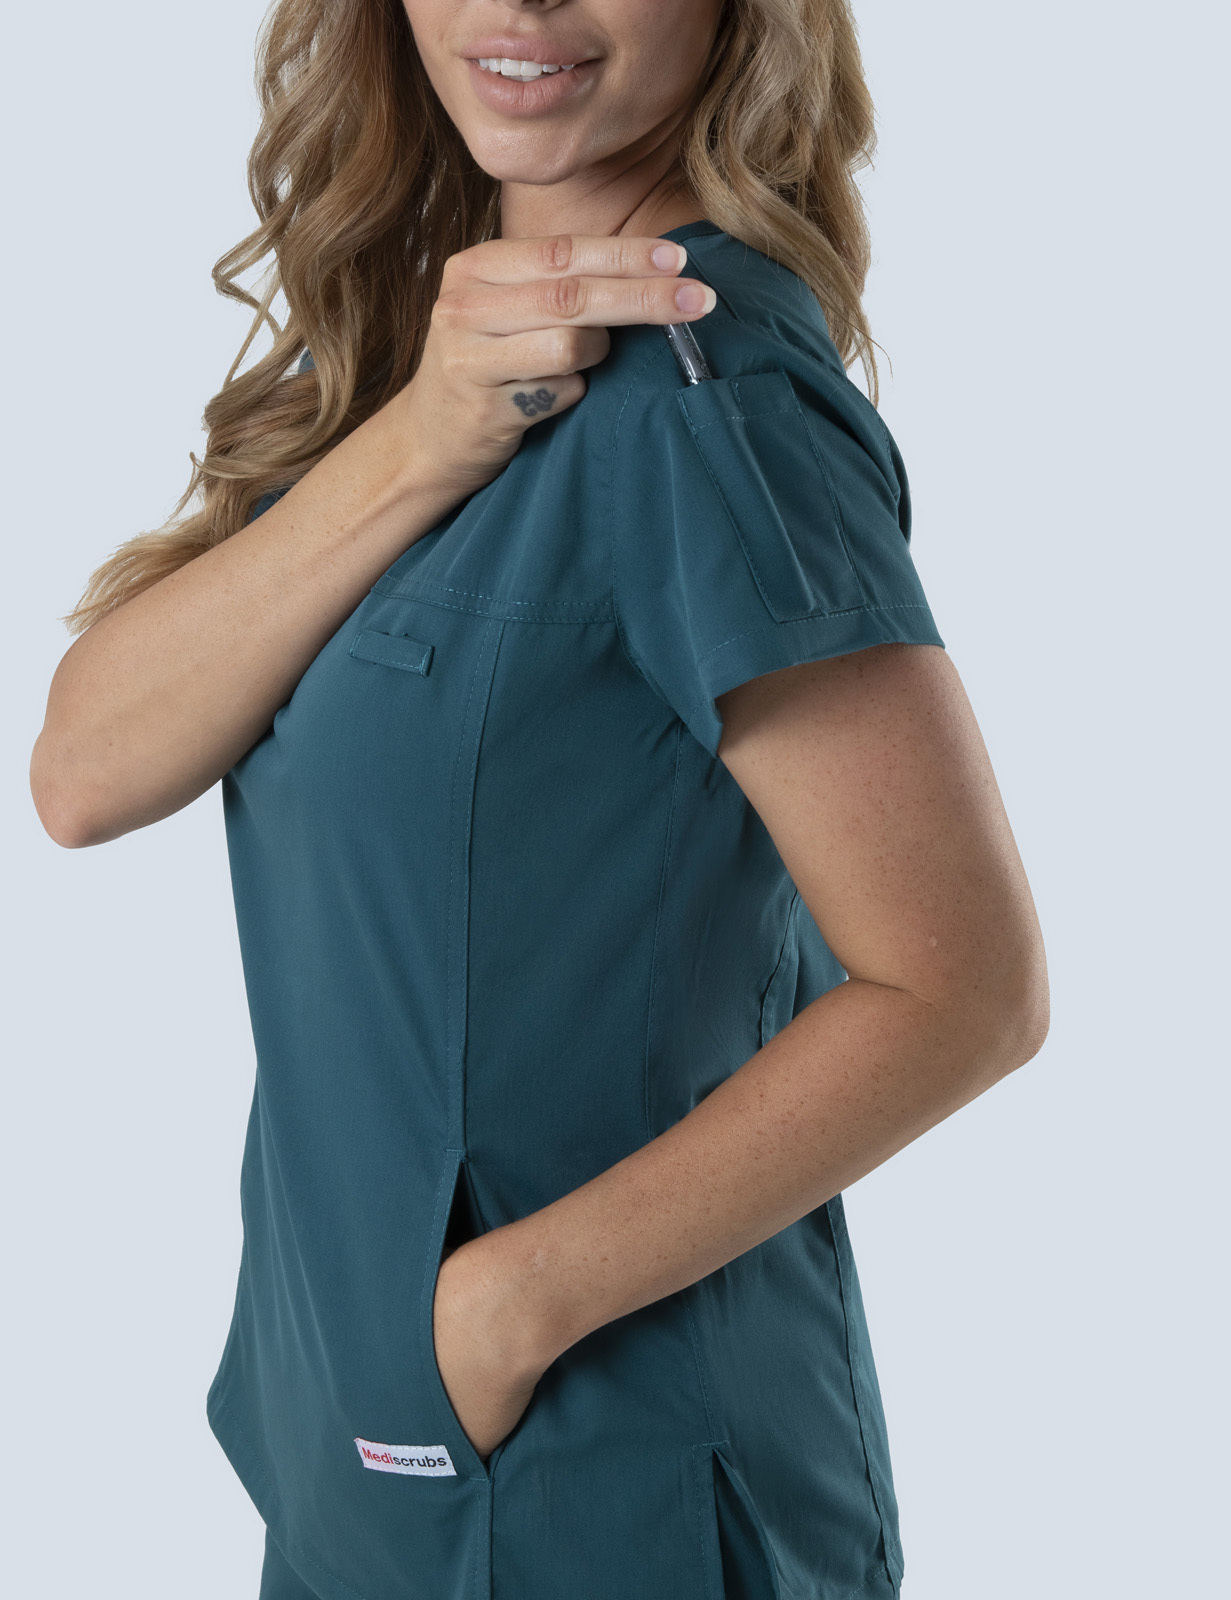 UQ Vets Gatton Anaesthesia Uniform Top Only Bundle (Women's Fit Solid Top in Caribbean incl Logos)